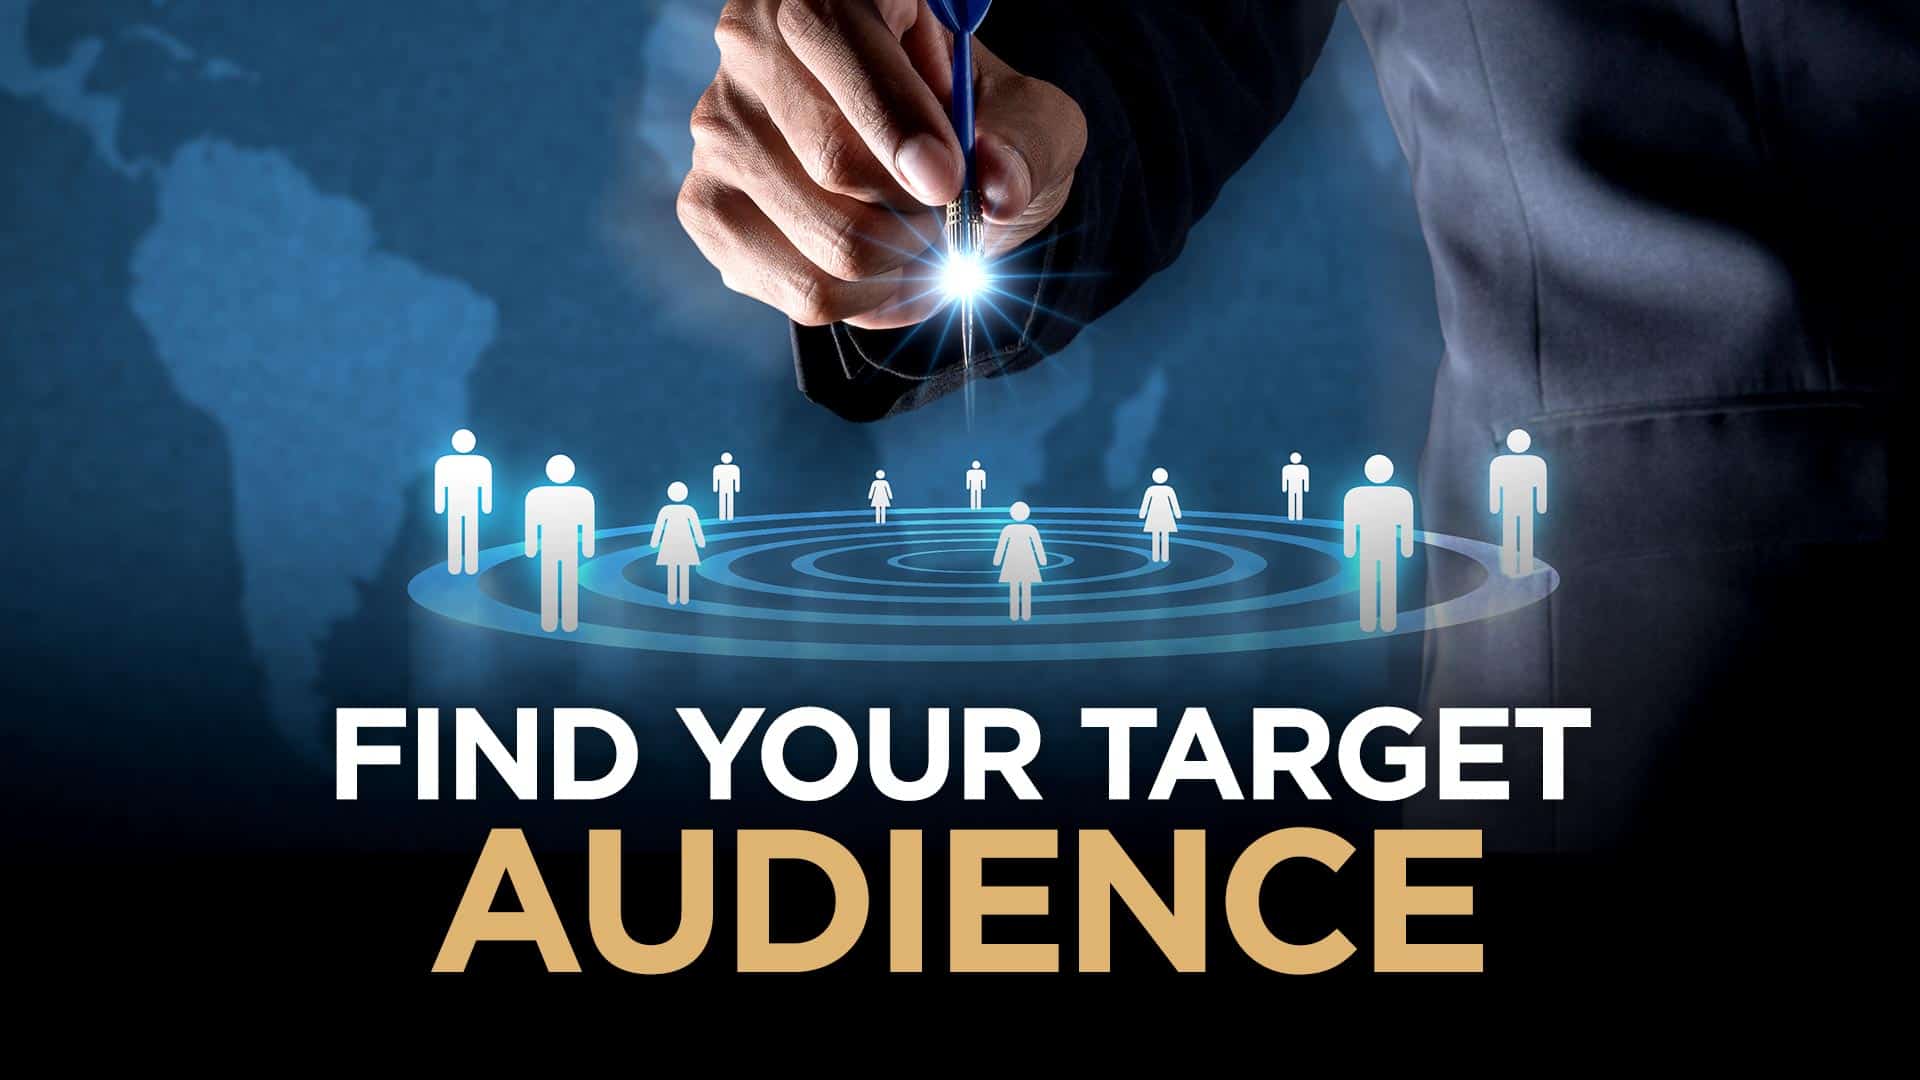 How To Find Your Target Audience Personas In 3 Steps